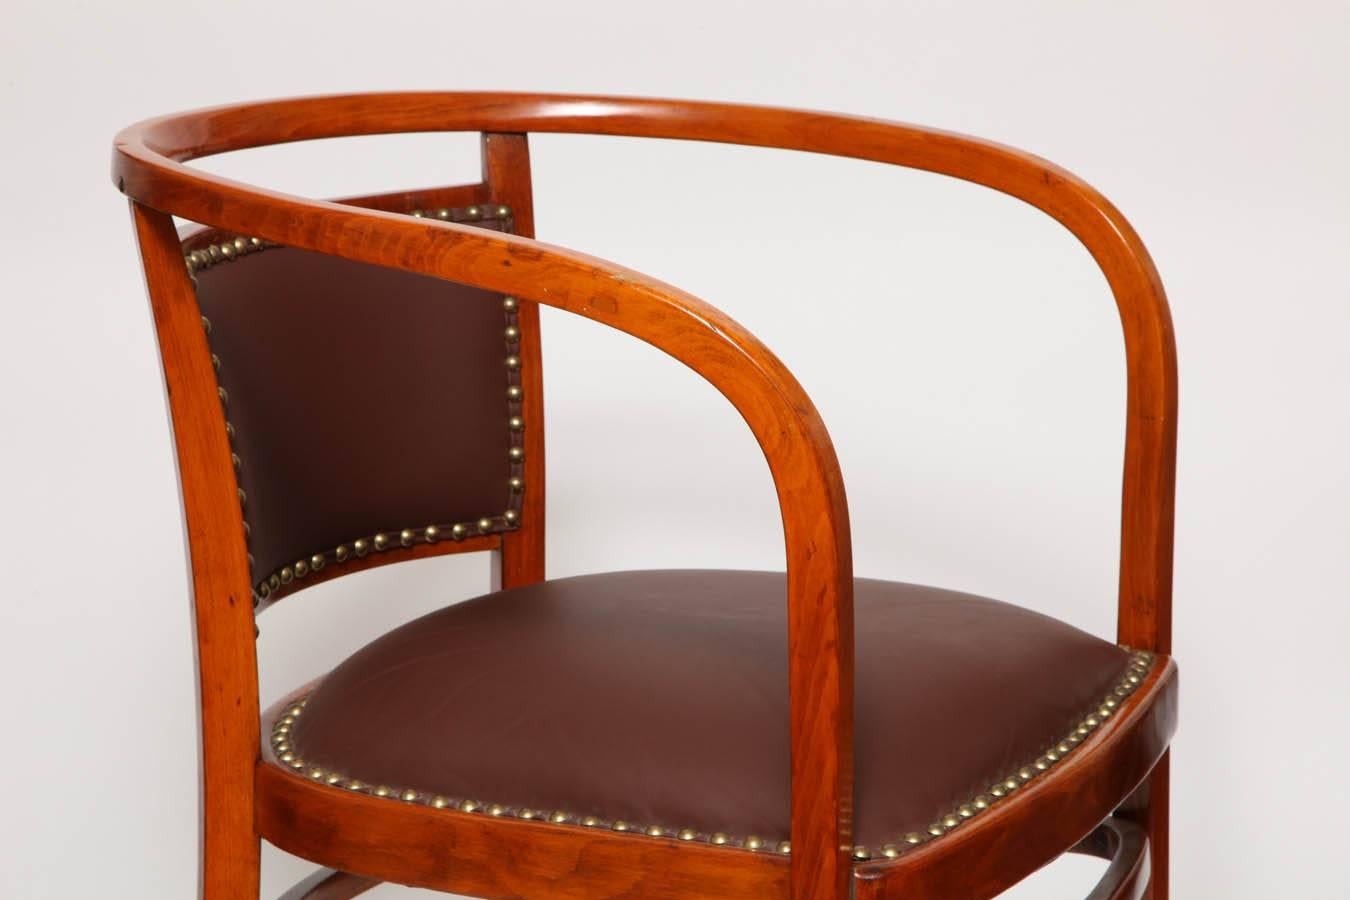 Stained Otto Wagner Secessionist Bentwood and Leather Armchair, J&J Kohn, 1906 For Sale